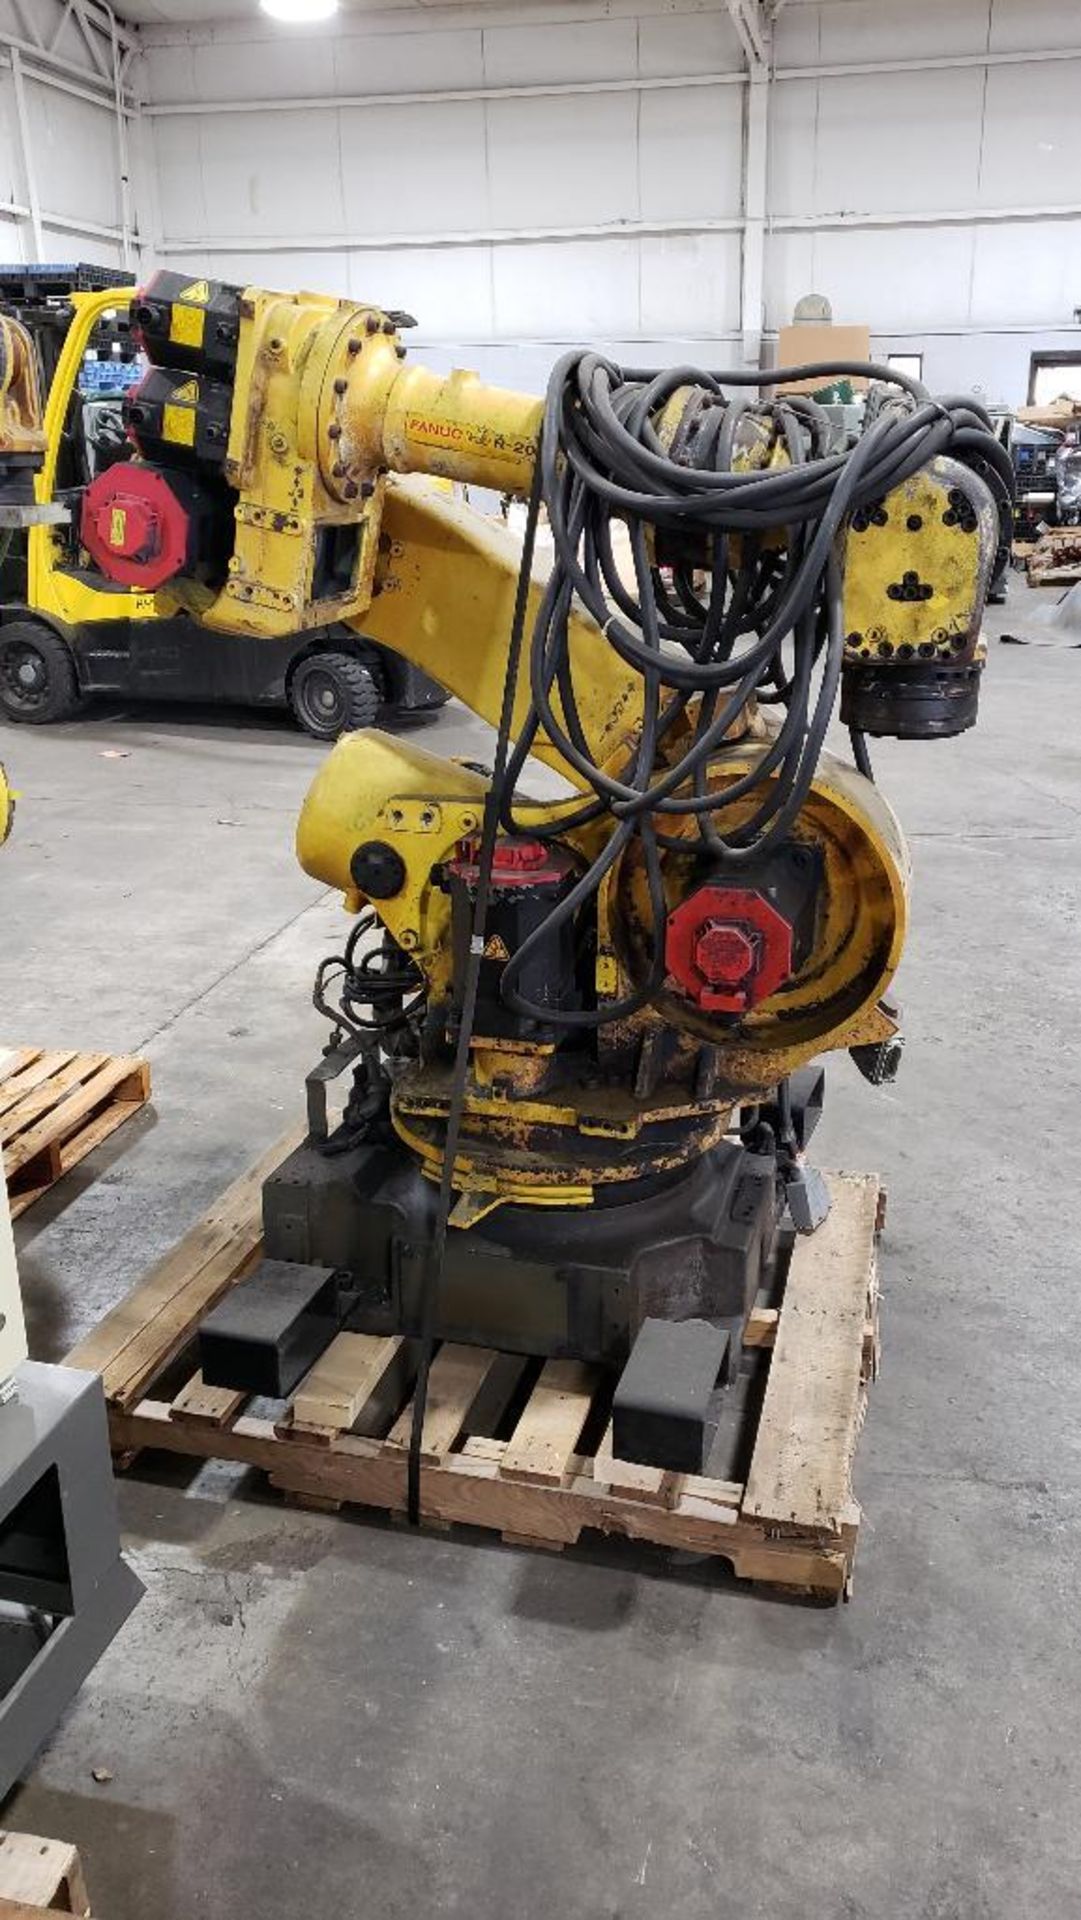 Fanuc R-2000iA/200F robot with Fanuc System R-J3iB controller. - Image 2 of 16